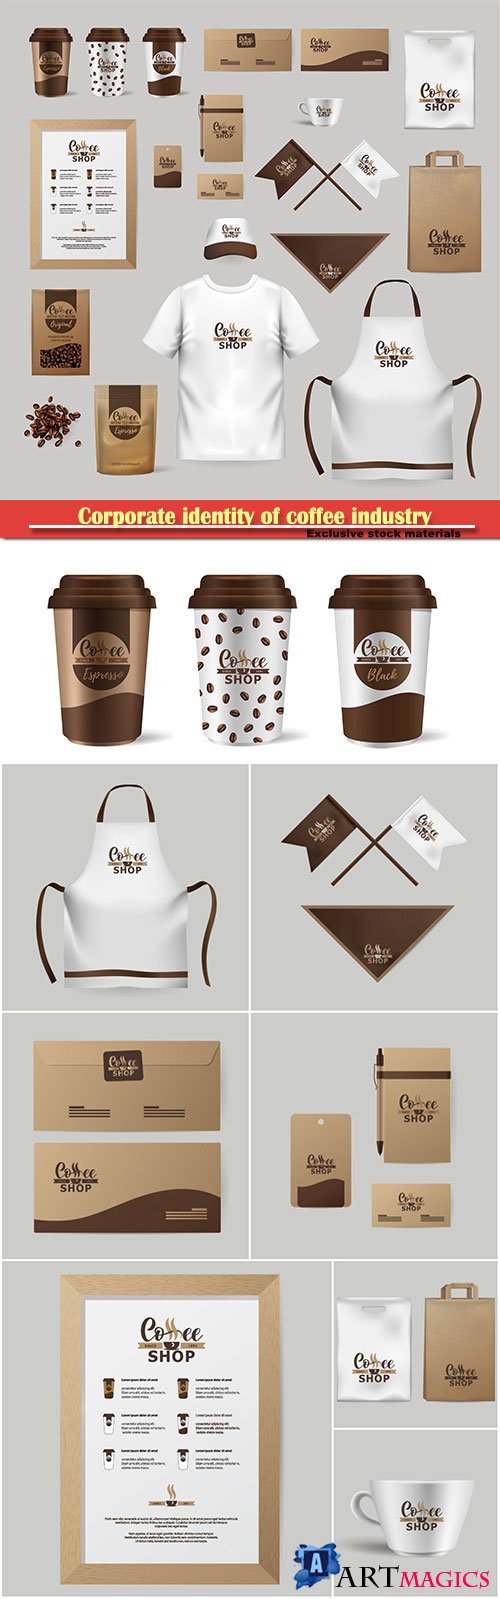 Corporate identity of coffee industry, realistic branding mock up template for cafe, coffee shop